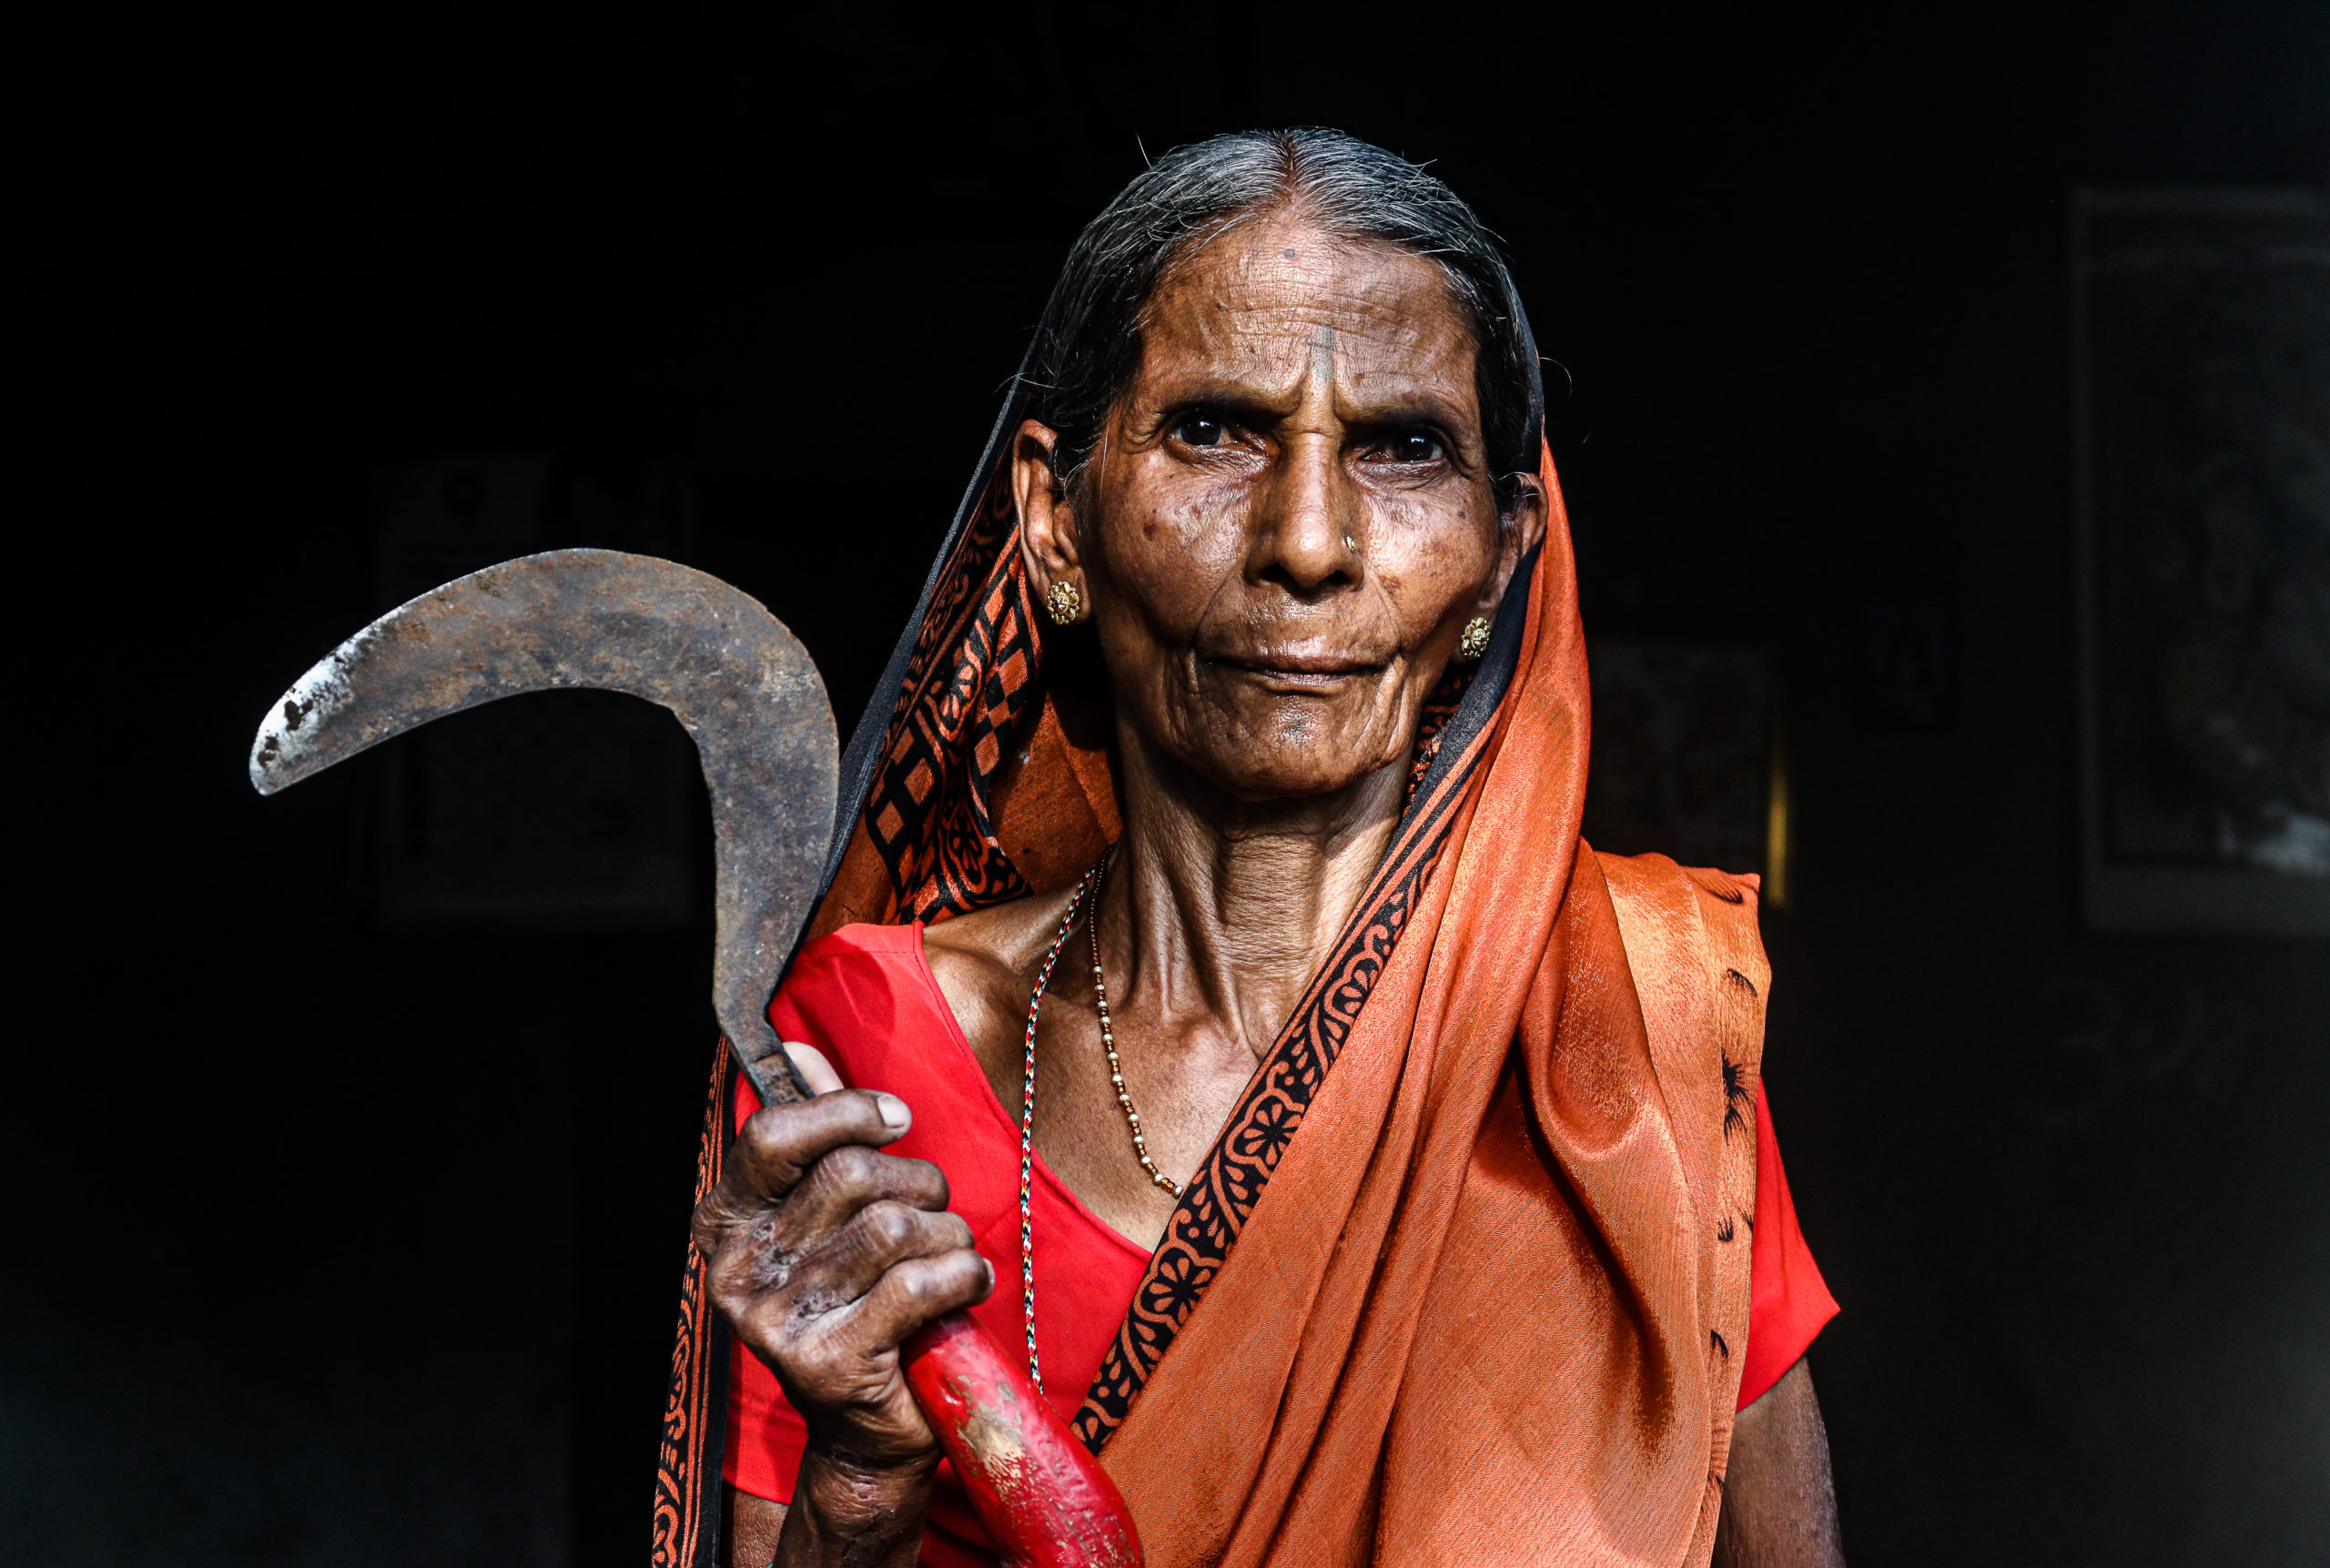 Vimal Ugale, in her 70s, does farm work to make ends meet. “Even today, I don’t know why my son thought of suicide.” / credit: Sanket Jain